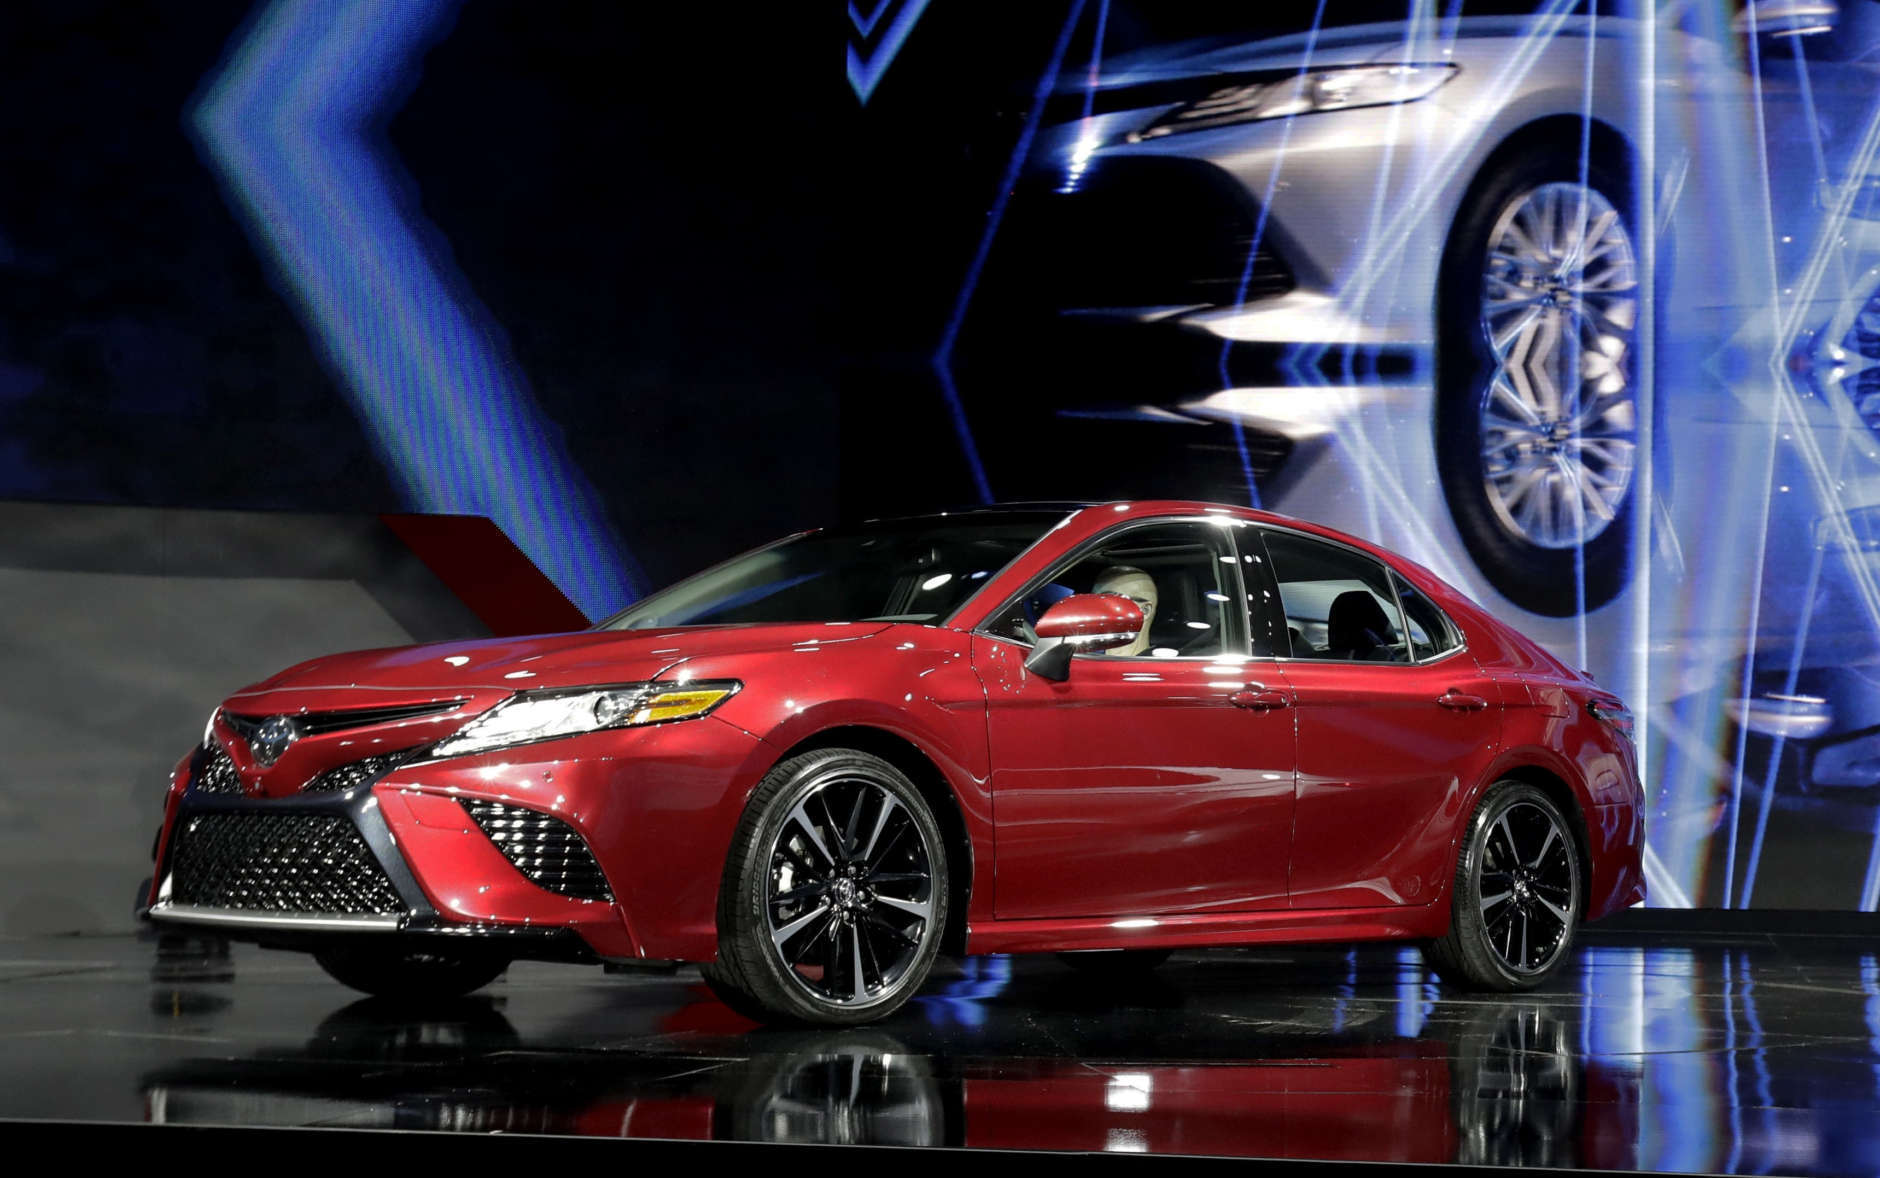 The 2018 Toyota Camry is presented at the North American International Auto show, Monday, Jan. 9, 2017, in Detroit. Toyota unveiled the eighth-generation Camry at the auto show Monday. (AP Photo/Carlos Osorio)